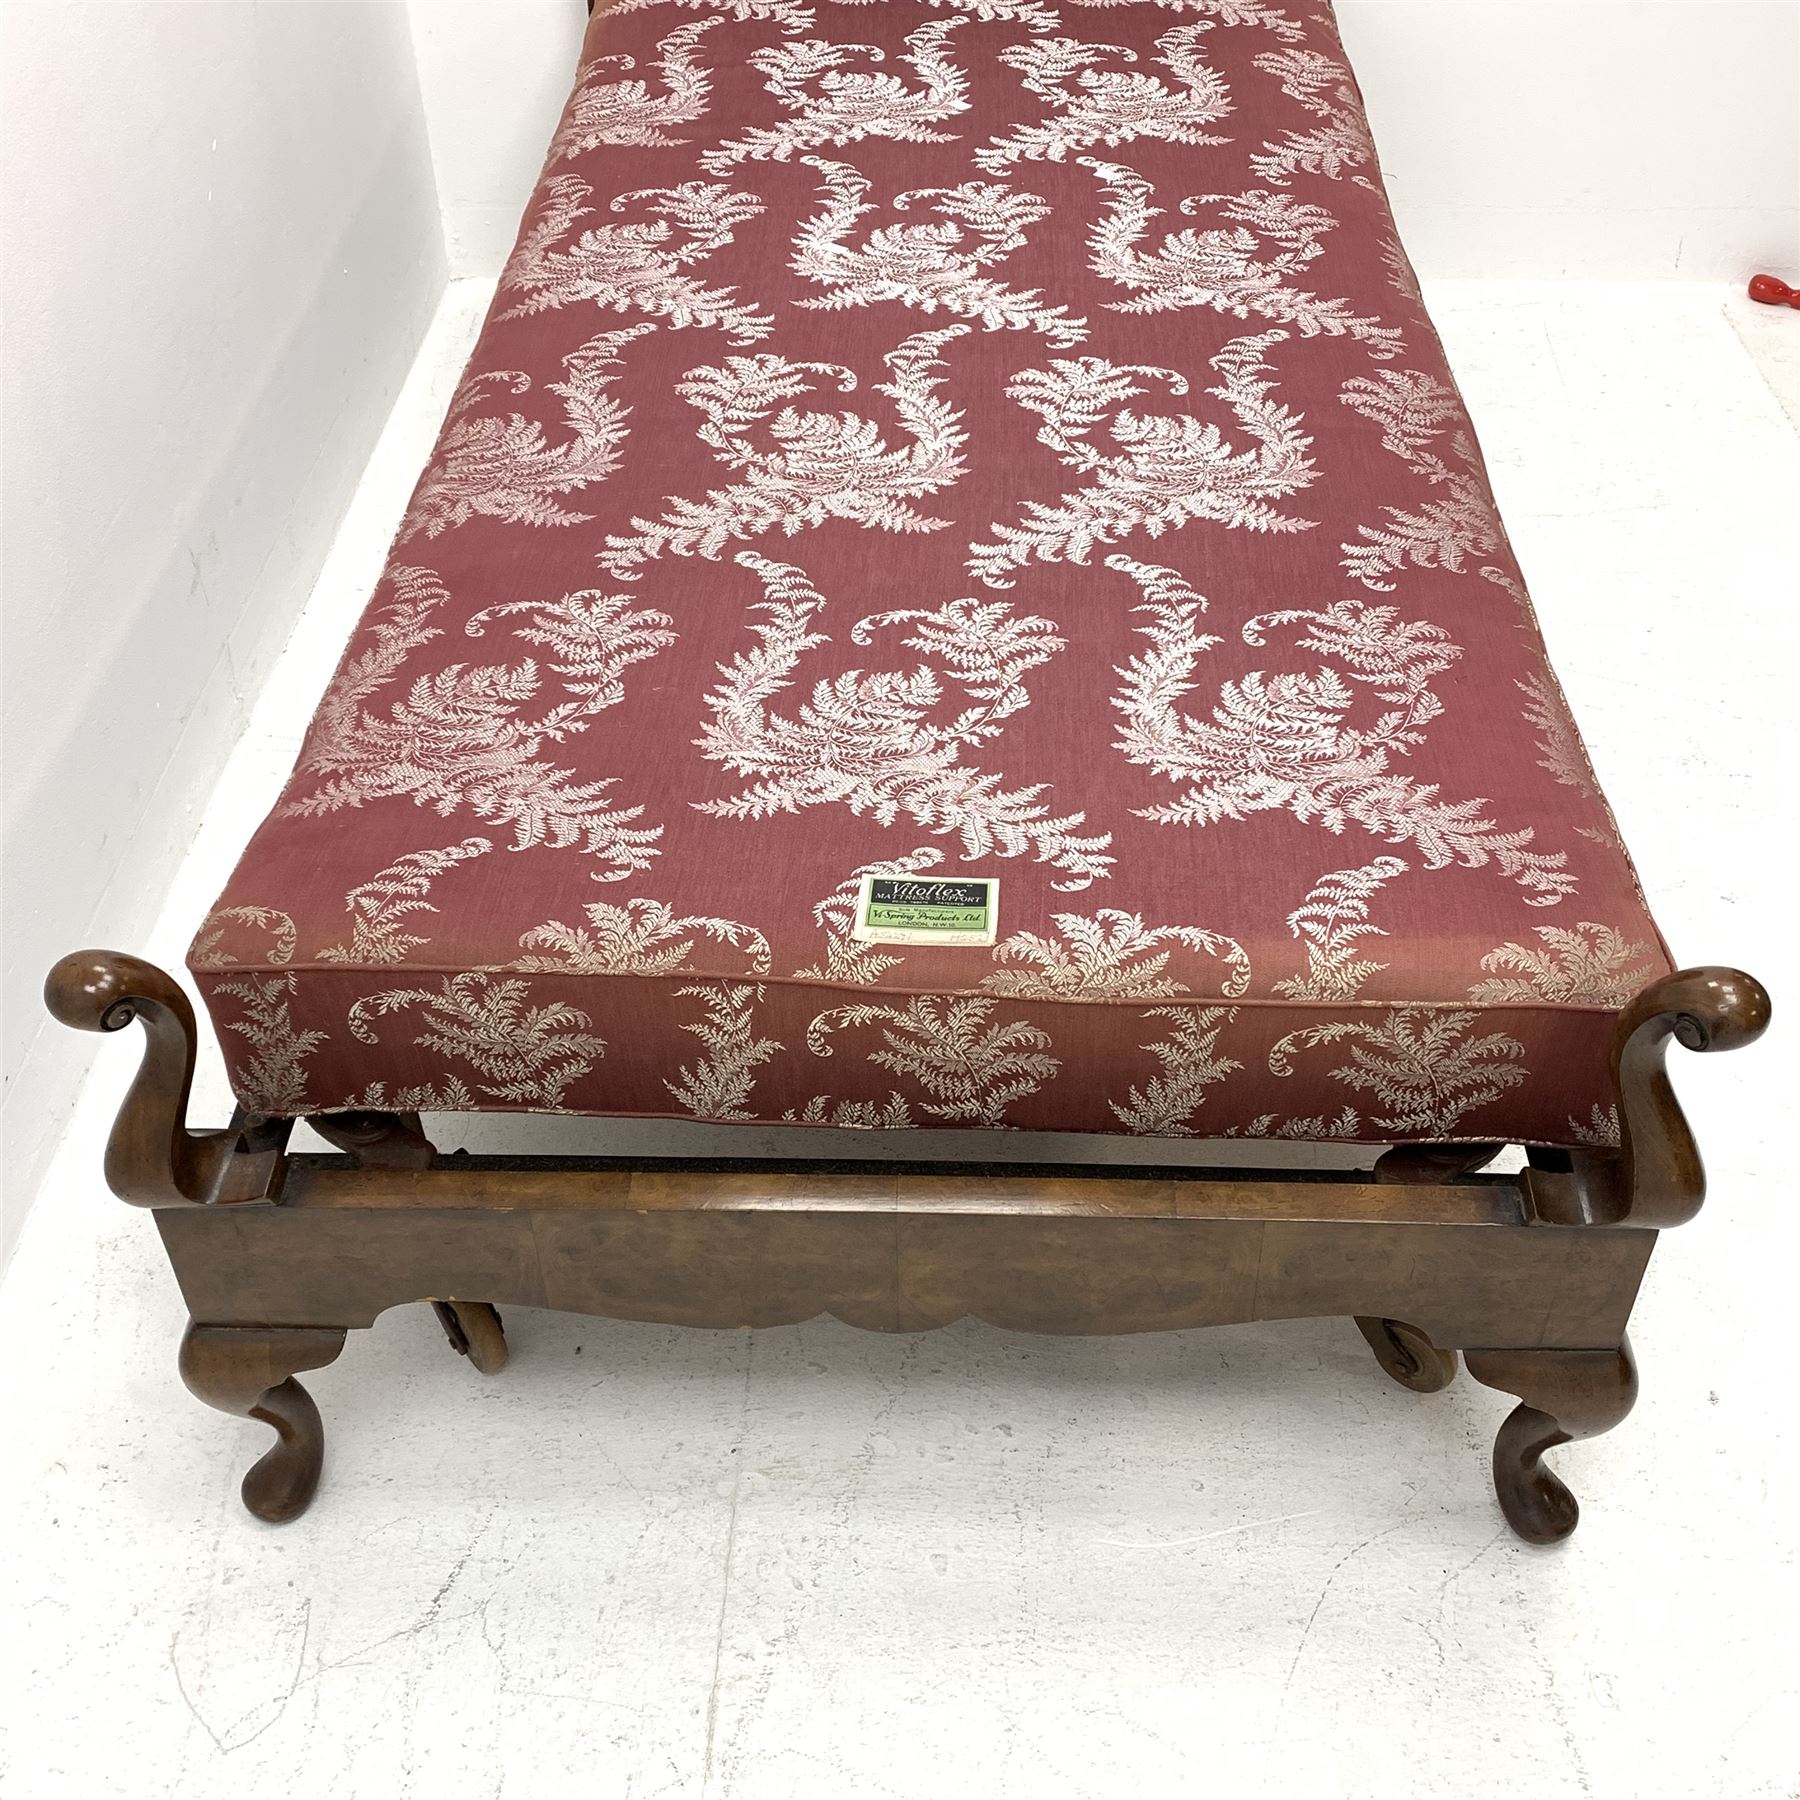 Pair 20th century walnut single 3' bedsteads, shaped and figured headboards, the footboards with scr - Image 9 of 9